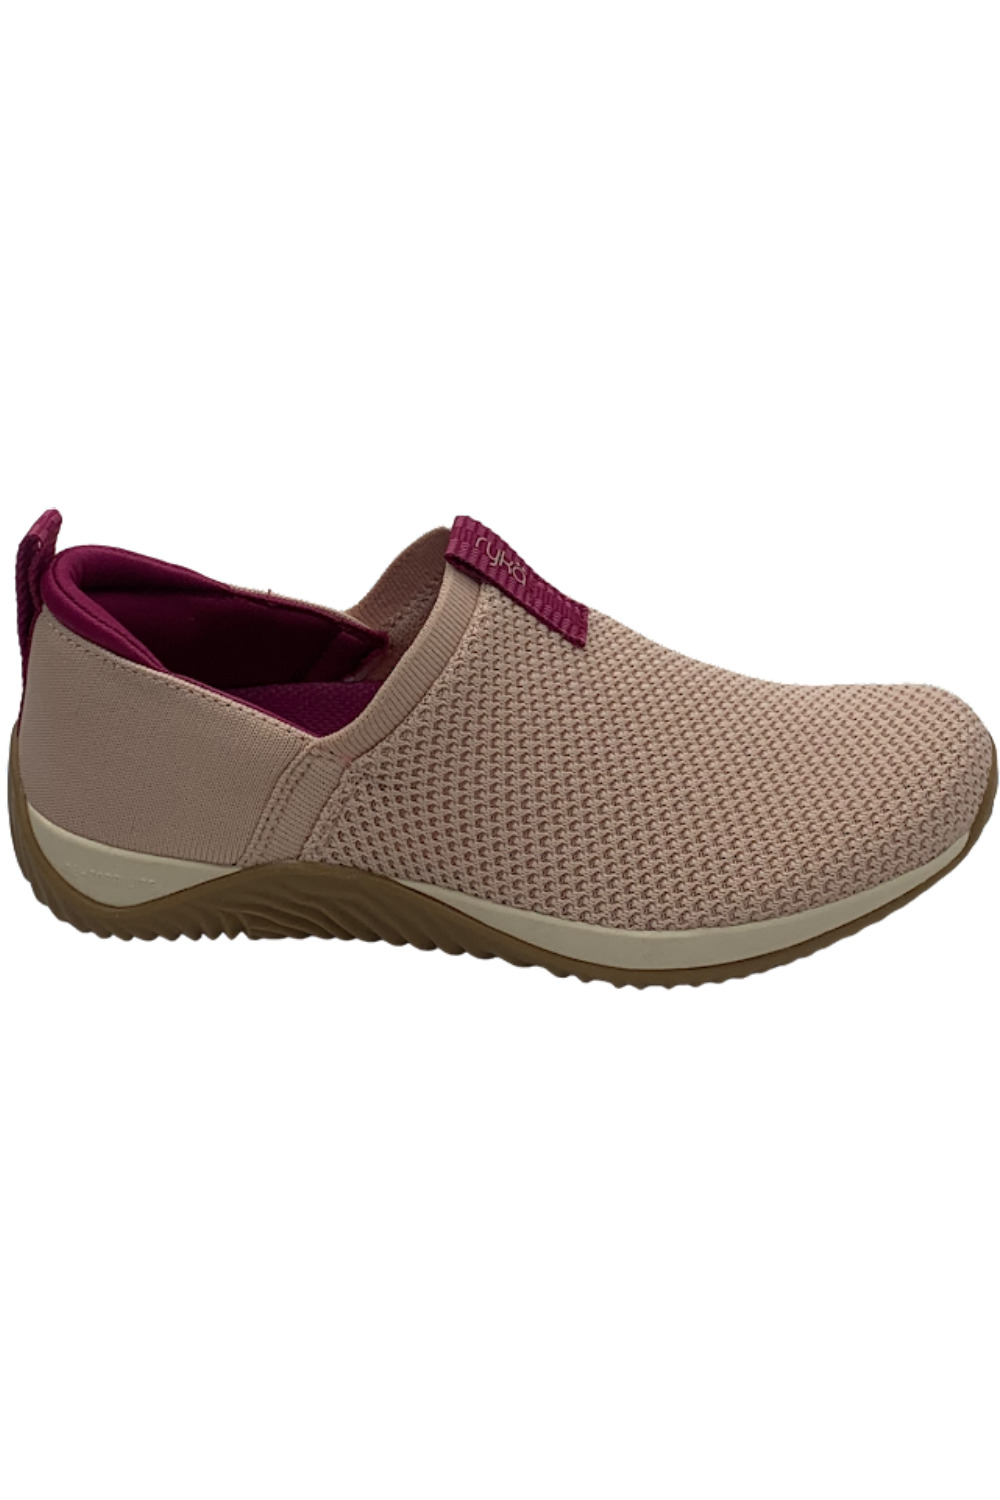 Ryka Trail Knit Slip-Ons Echo Ease Cool Tones Pink Whip